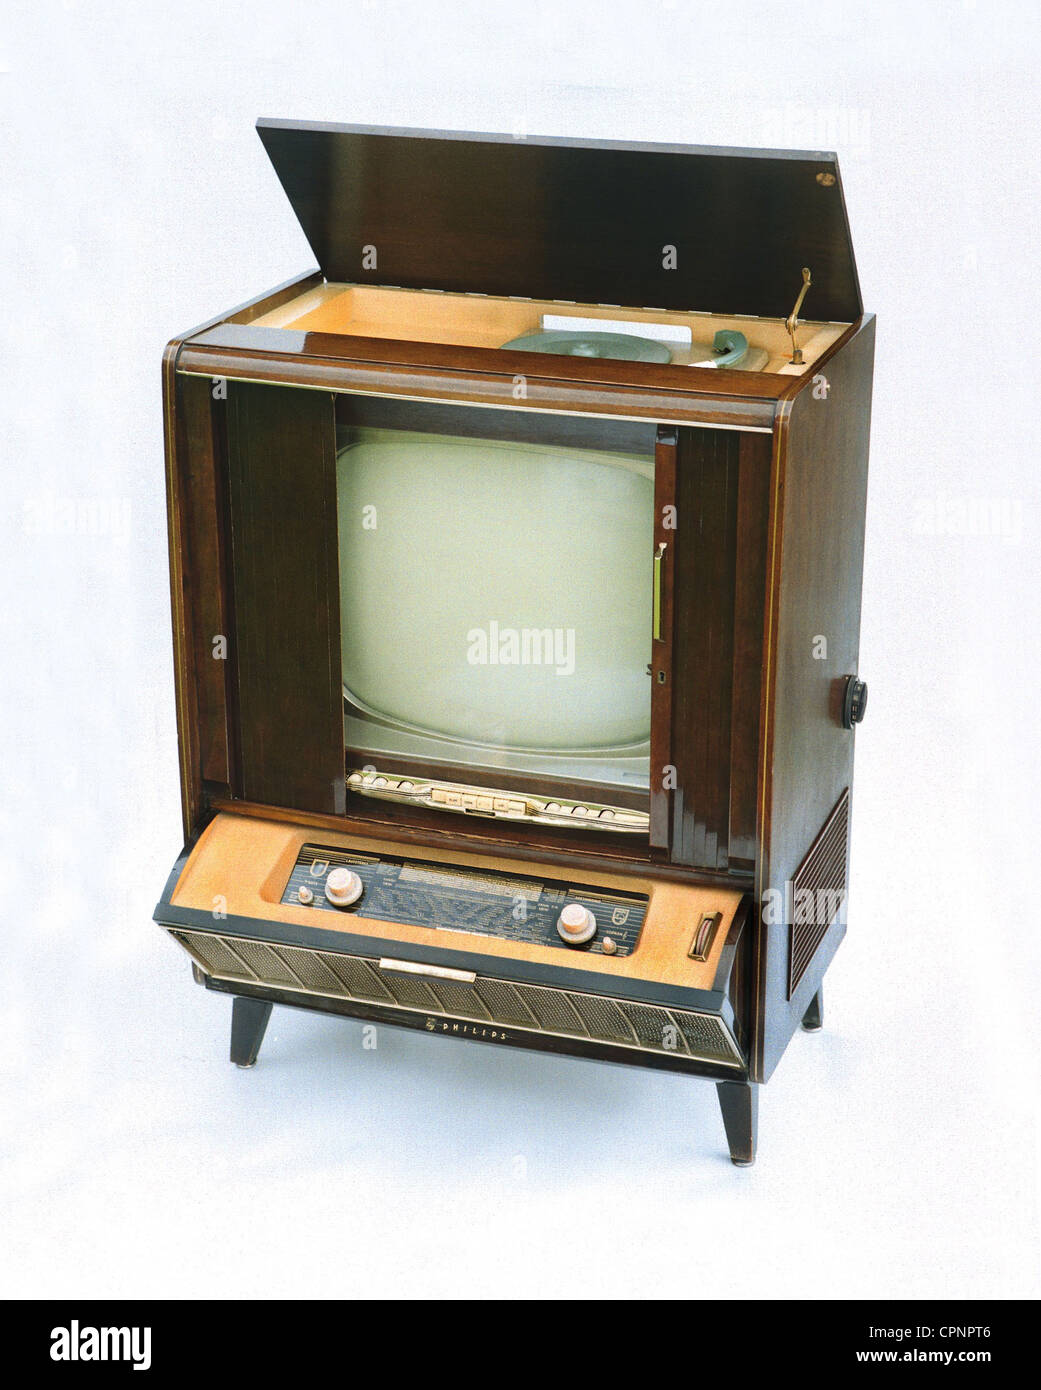 broadcast, television, television cabinet Philips 'Leonardo', television-radio-phono combination, integrated folded radio set, record player under the cover, screen, closeable with blinds, picture tube 53 centimeter diagonal, Germany, 1959, Additional-Rights-Clearences-Not Available Stock Photo